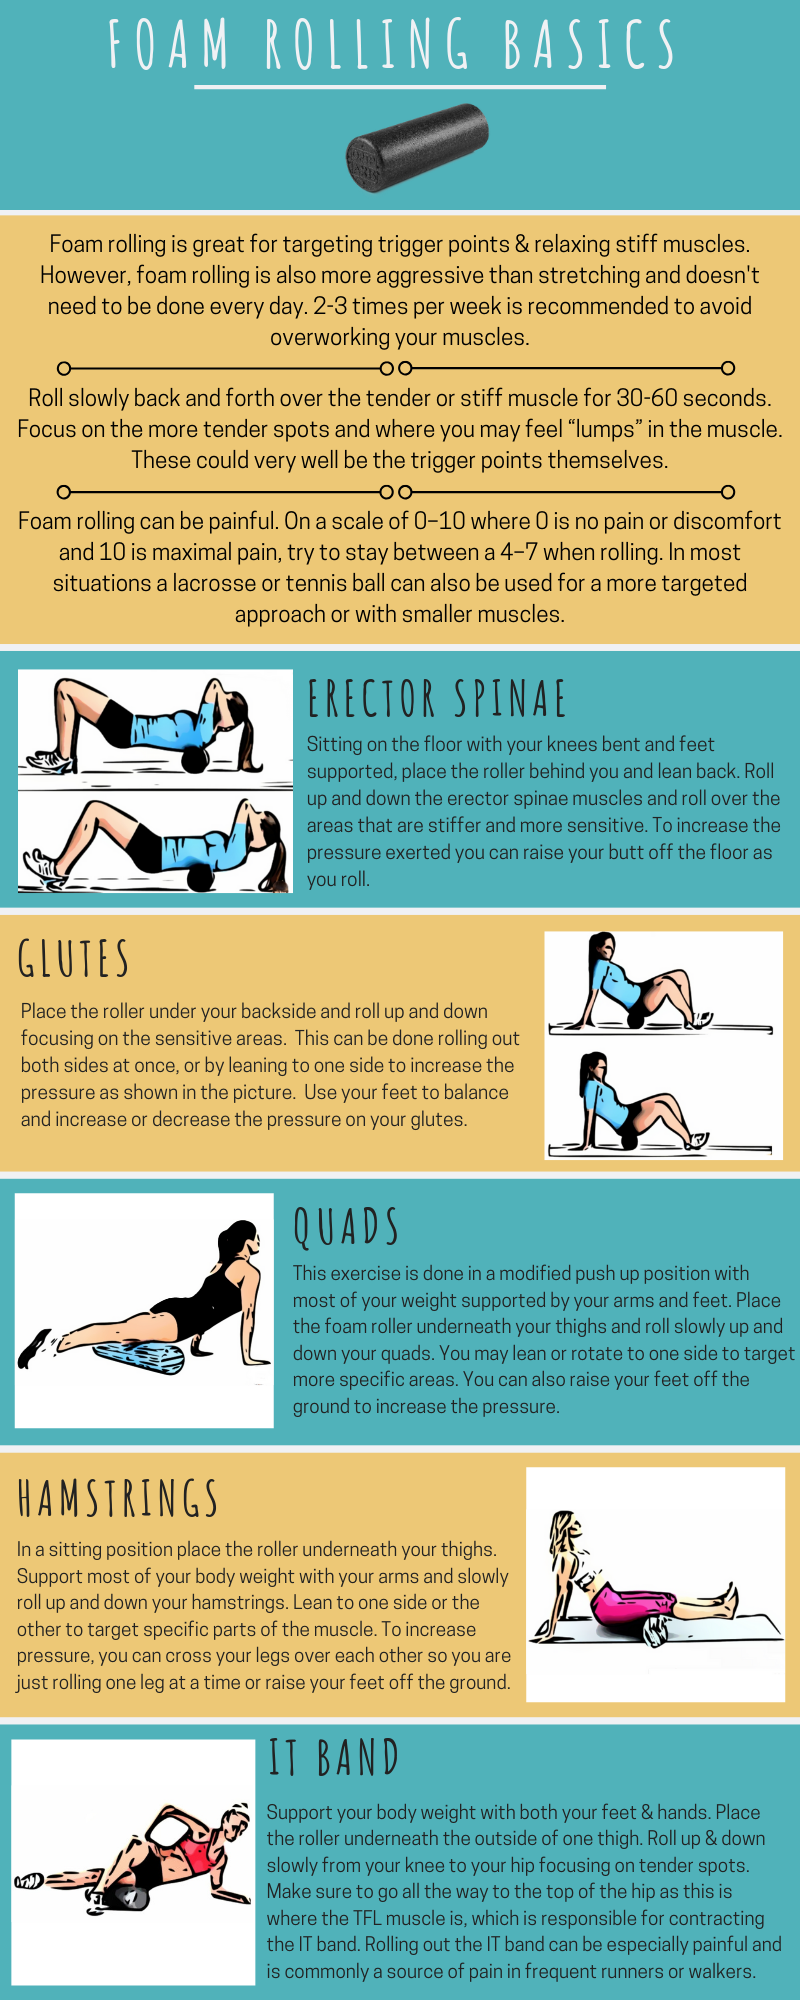 How Do I Use a Foam Roller? The Basics Oakville Chiropractic Centre